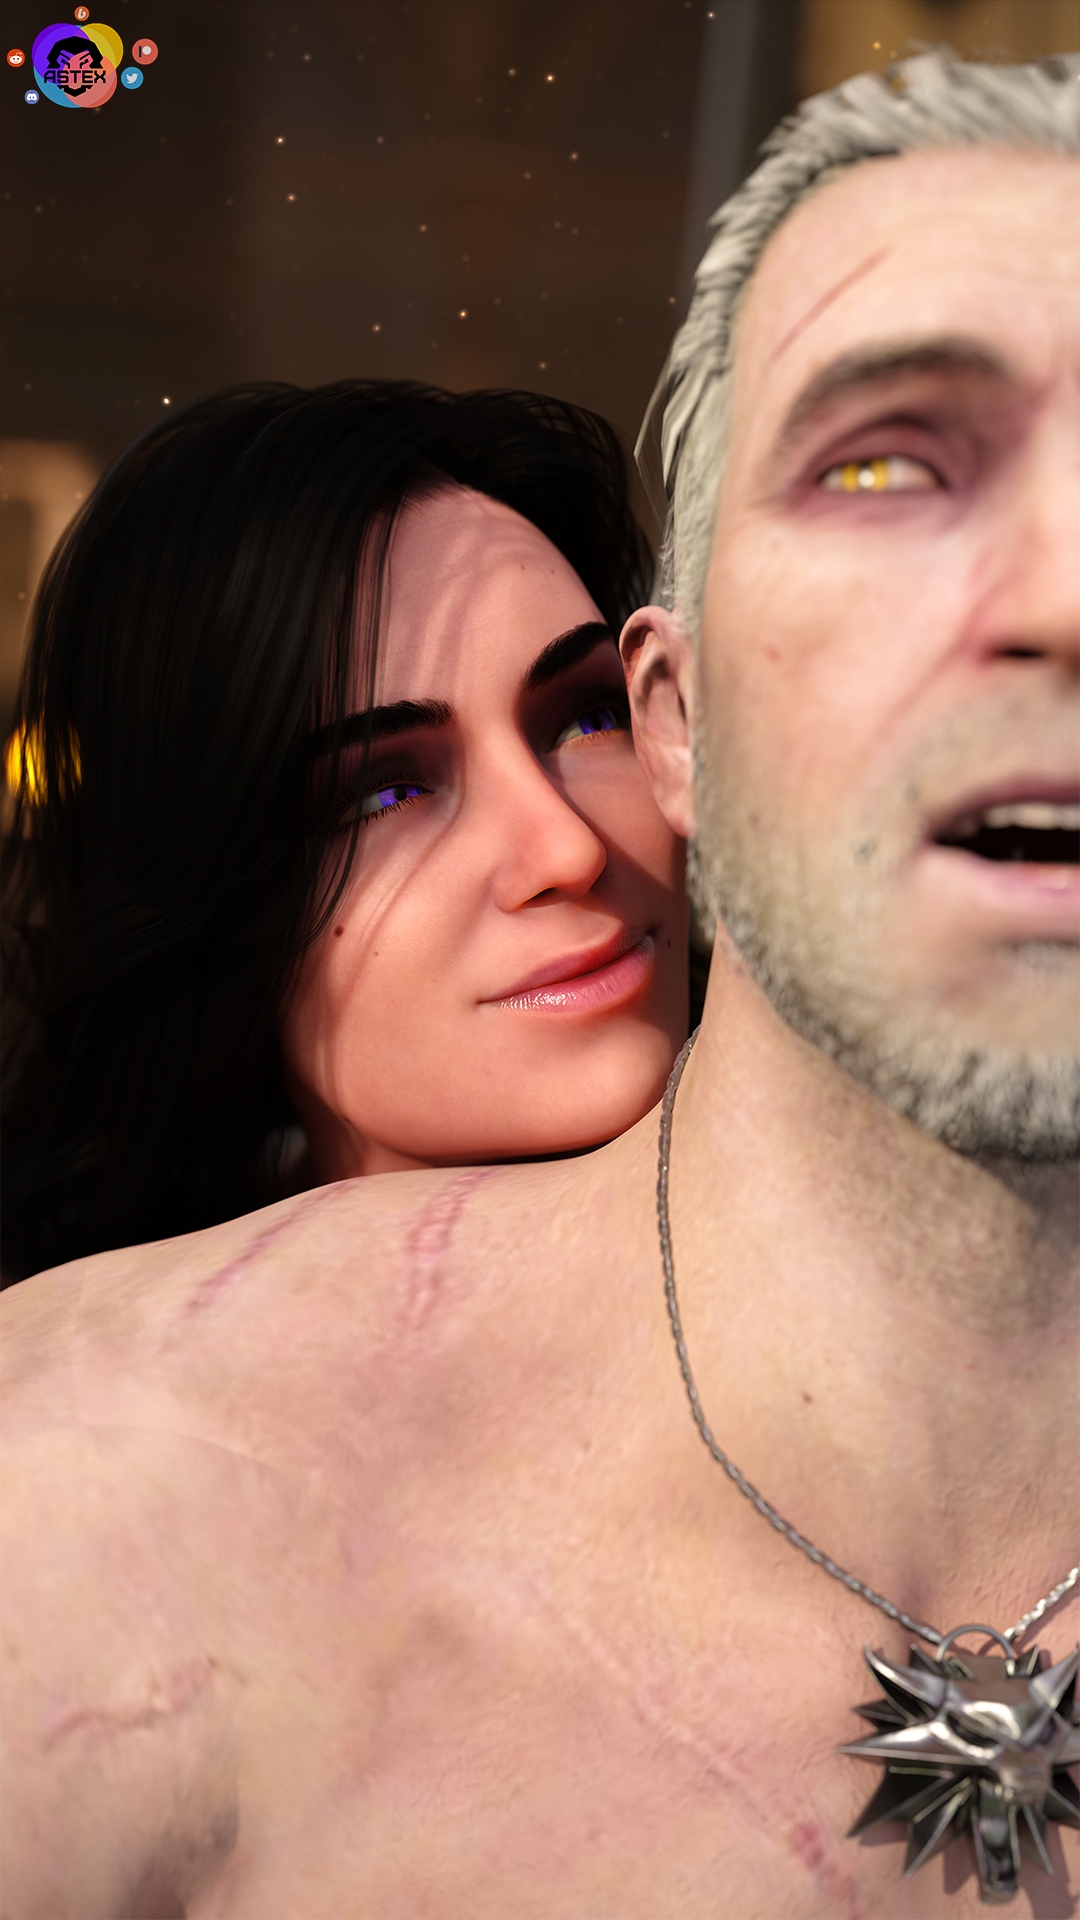 Yennefer and Geralt. Mutual love💕 The Witcher Yennefer di Vengerberg Ciri (The Witcher) Strapon Anal Anal Penetration Big Dick Dick Nipples Pink Nipples Pussy Boobs Big boobs Big Tits Big Ass Cake Sexy Horny Face Horny 3d Porn 2